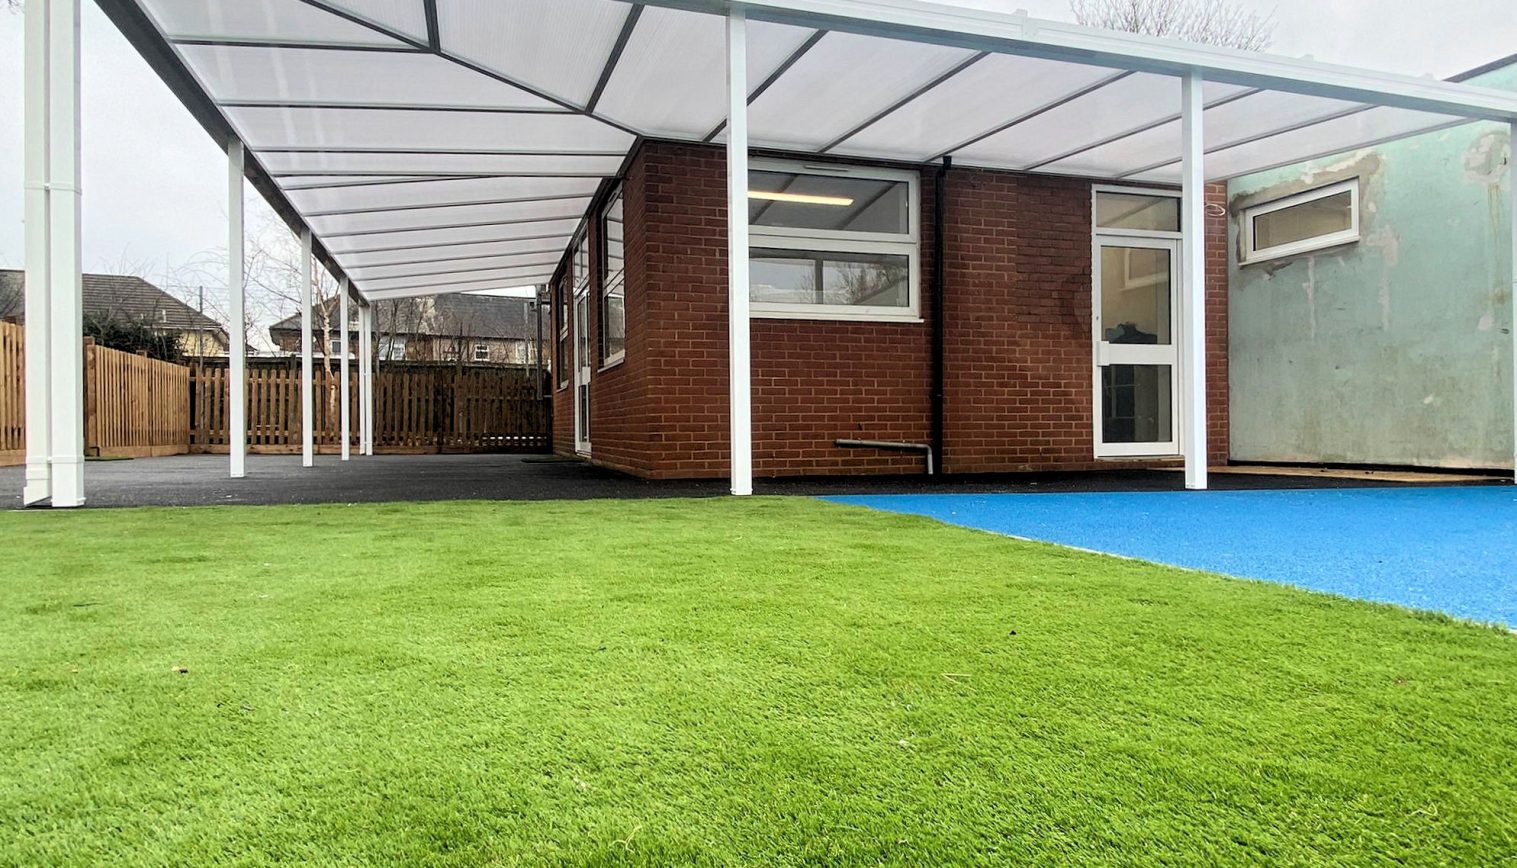 Becontree Primary School – Wall Mounted Canopies